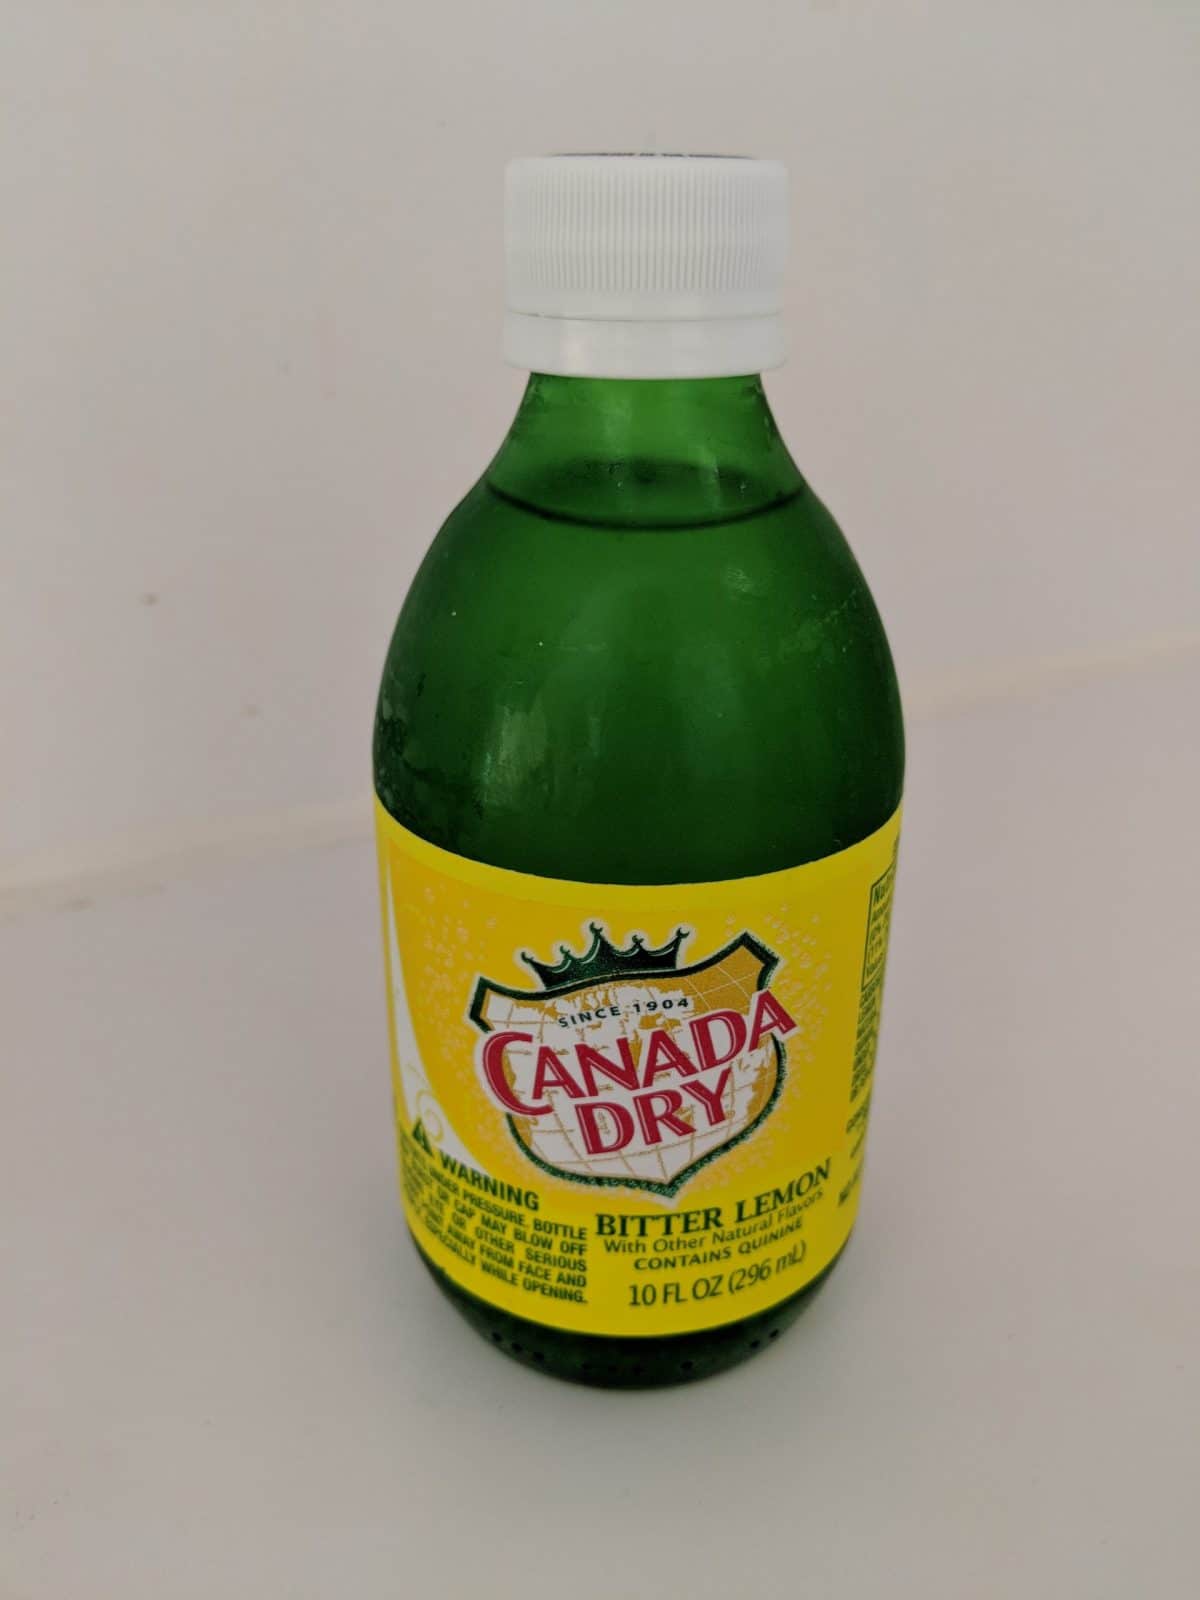 Canada Dry Bitter Lemon Tonic Water Review And Tasting Notes